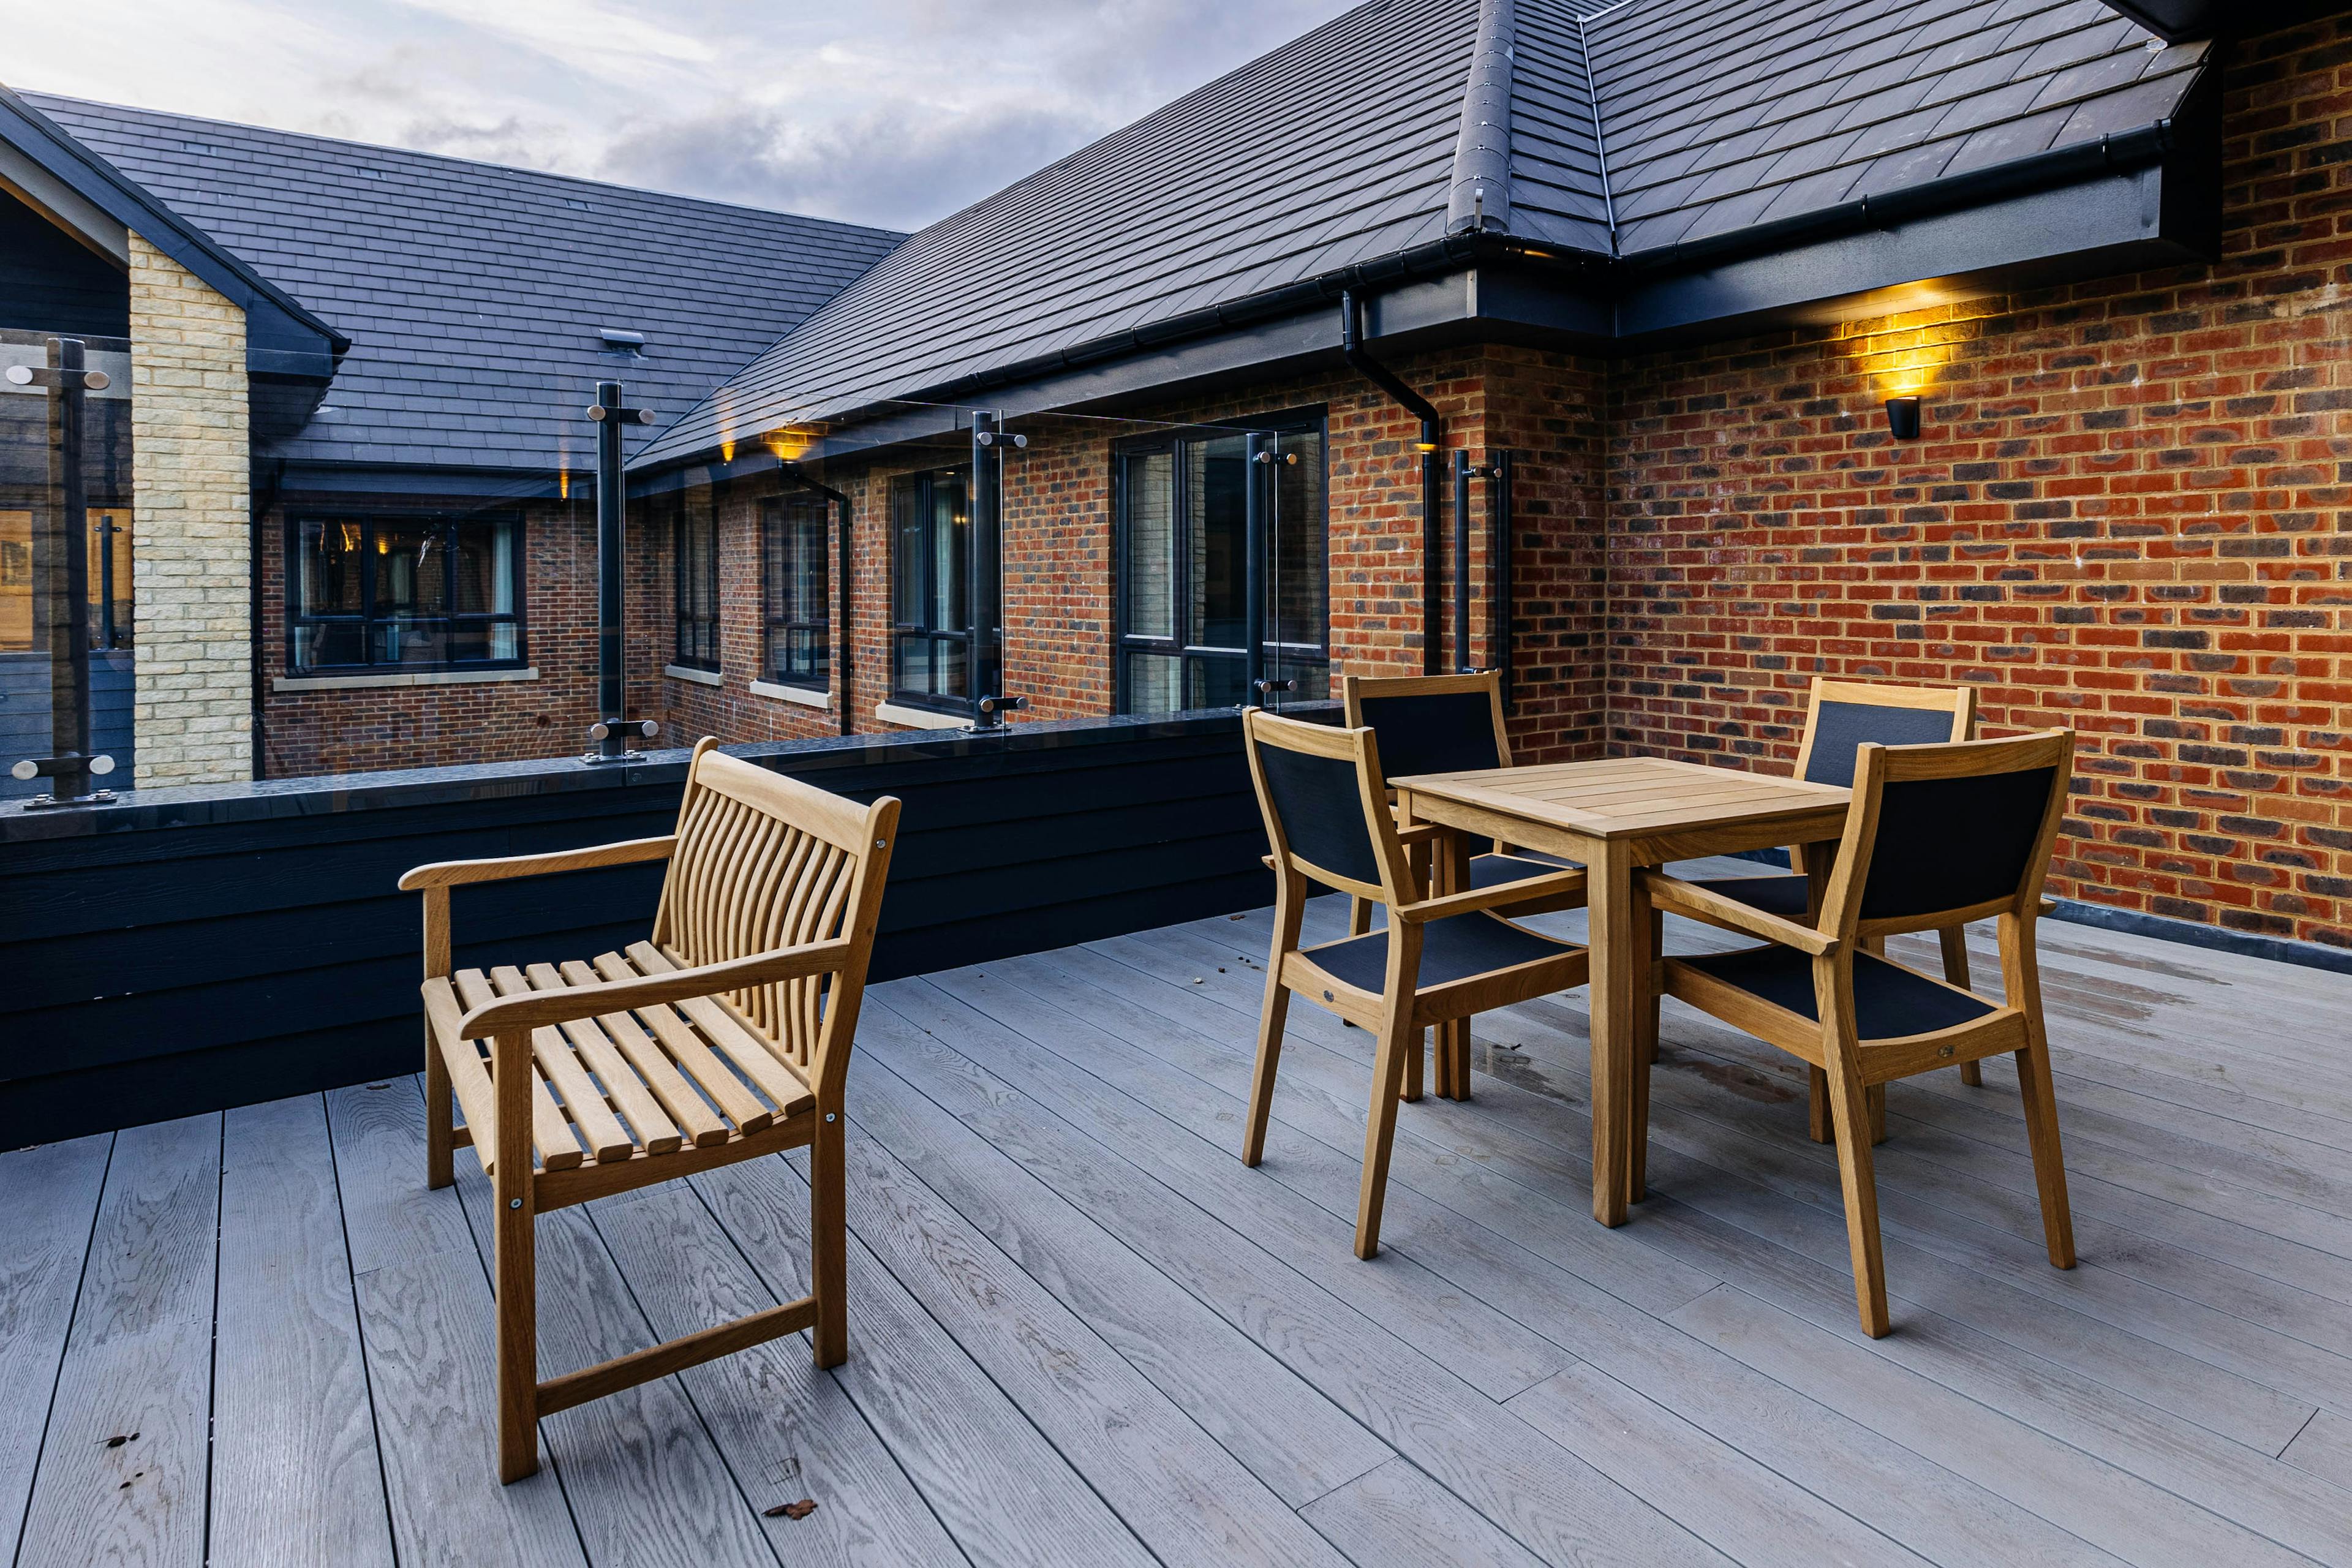 Balcony at Parley Place Care Home in Ferndown, Dorset